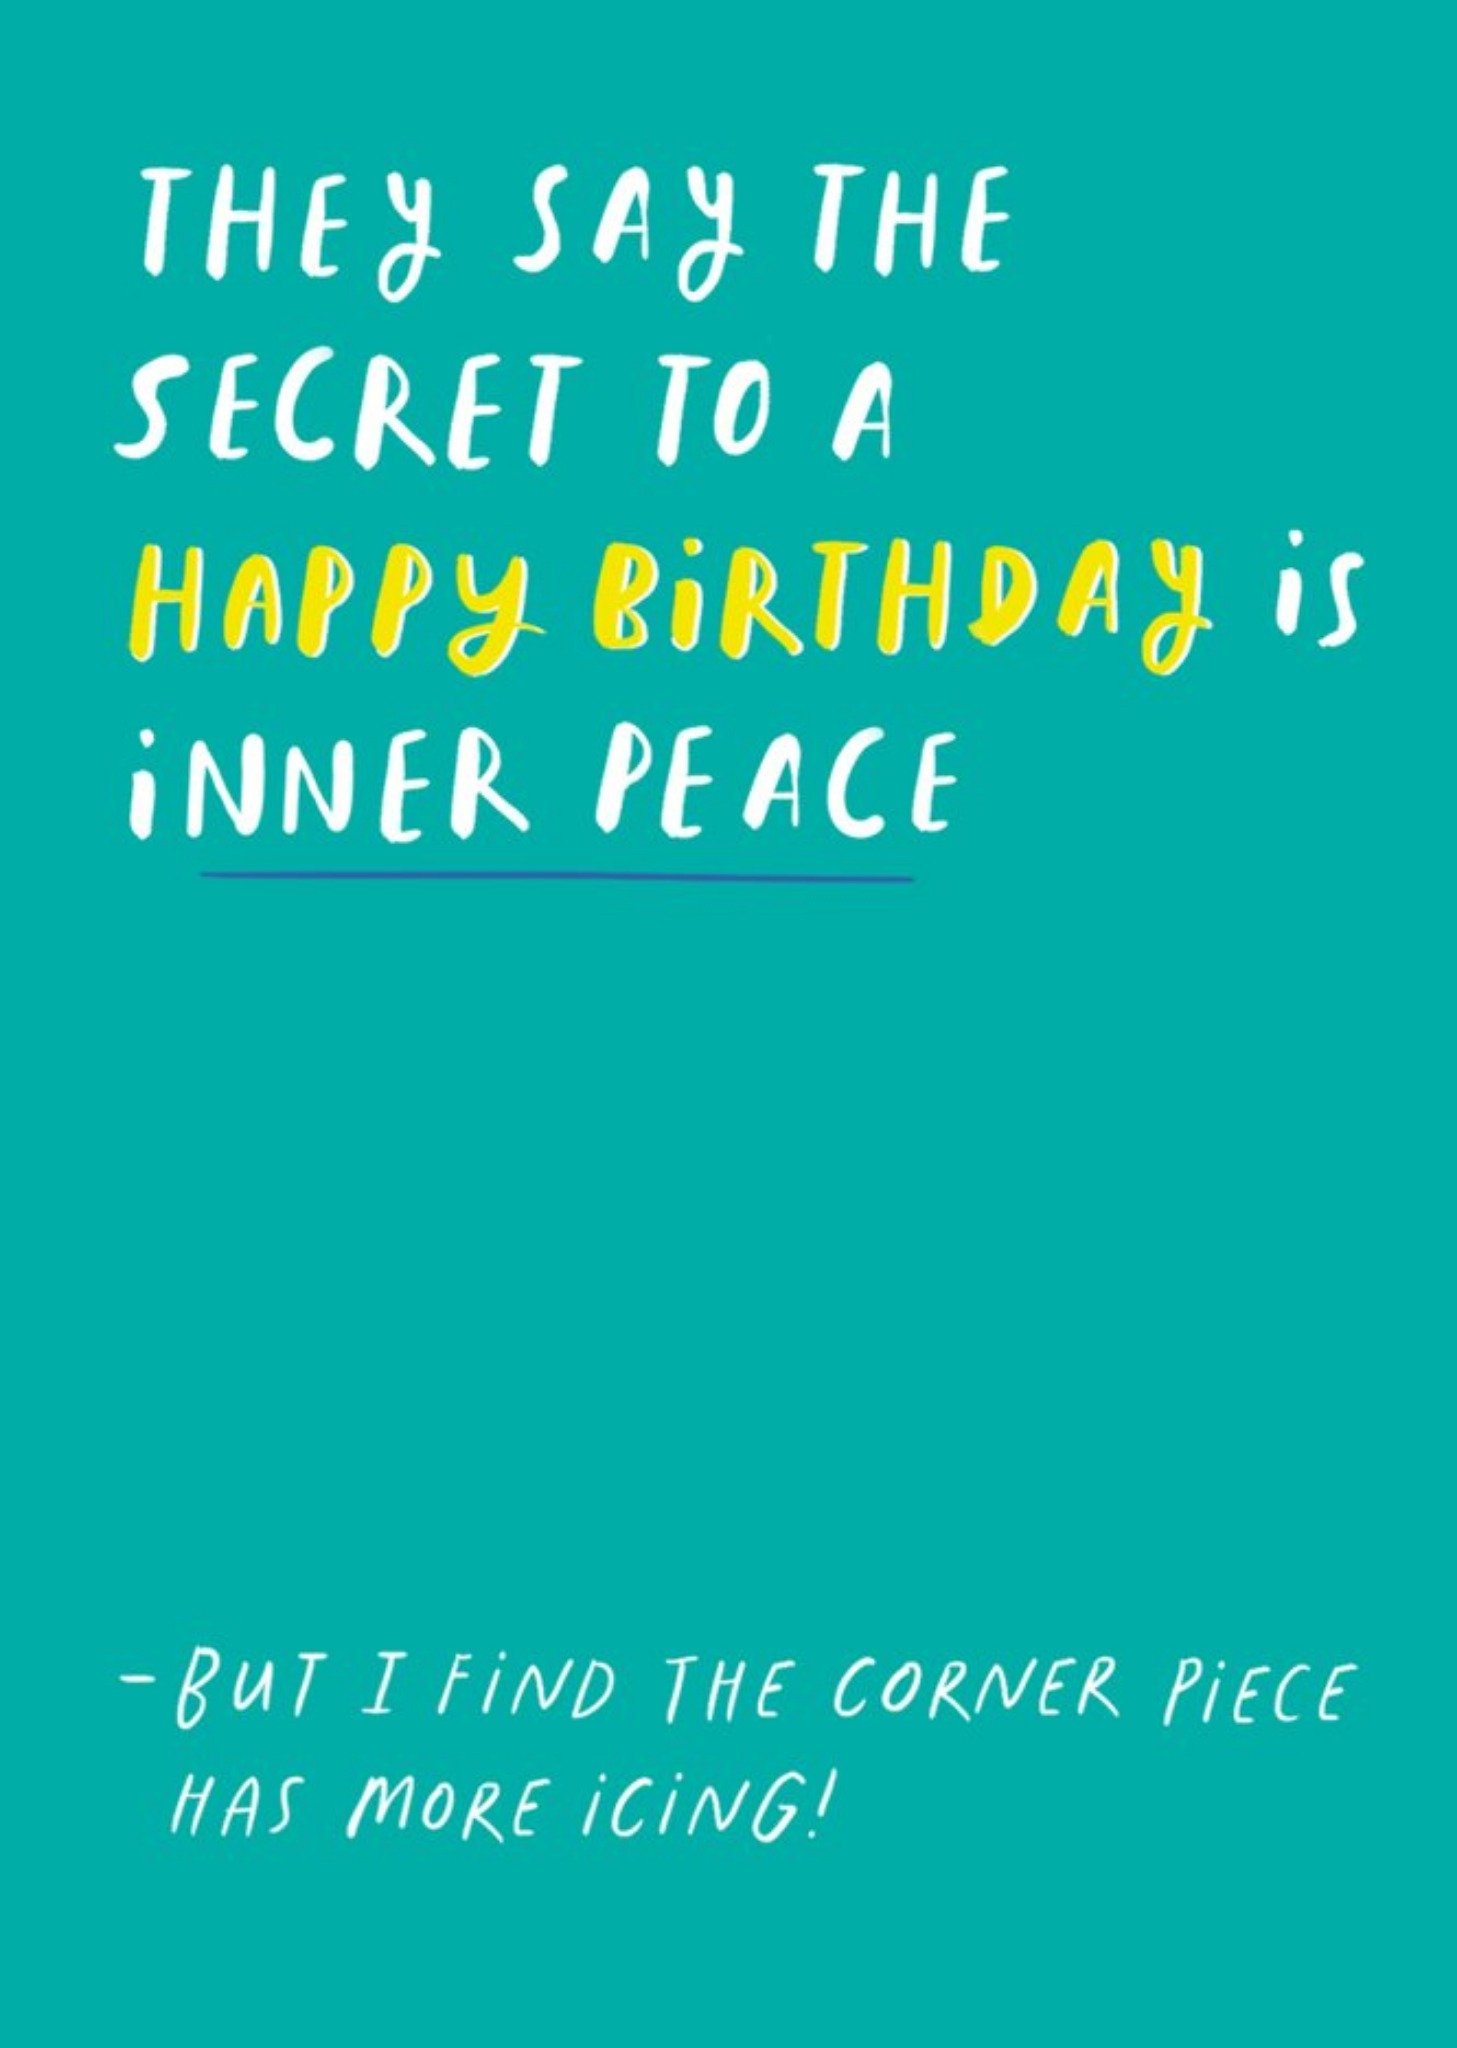 Moonpig Humourous Typography On A Teal Background Birthday Card Ecard